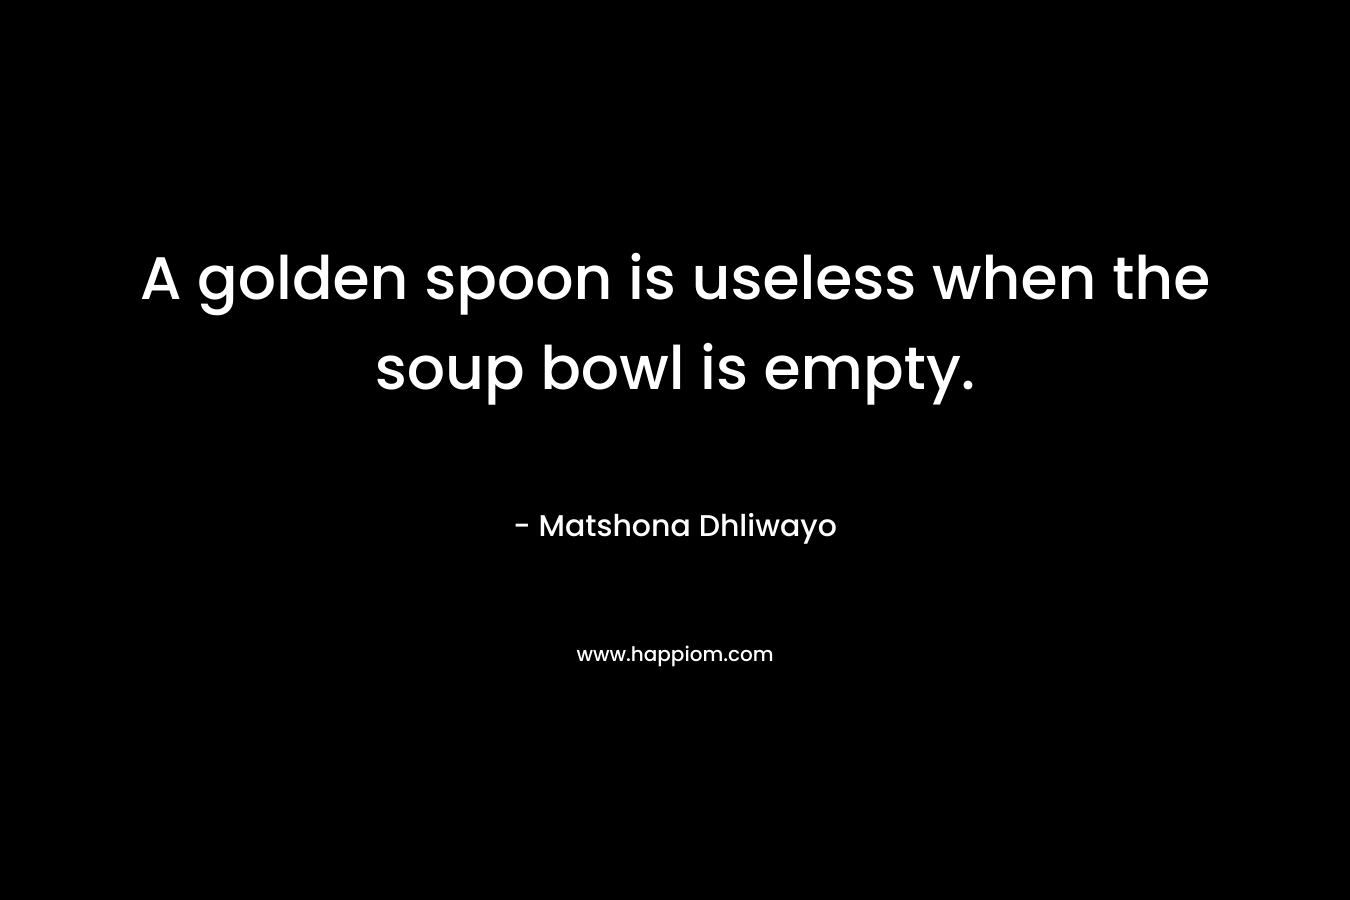 A golden spoon is useless when the soup bowl is empty.